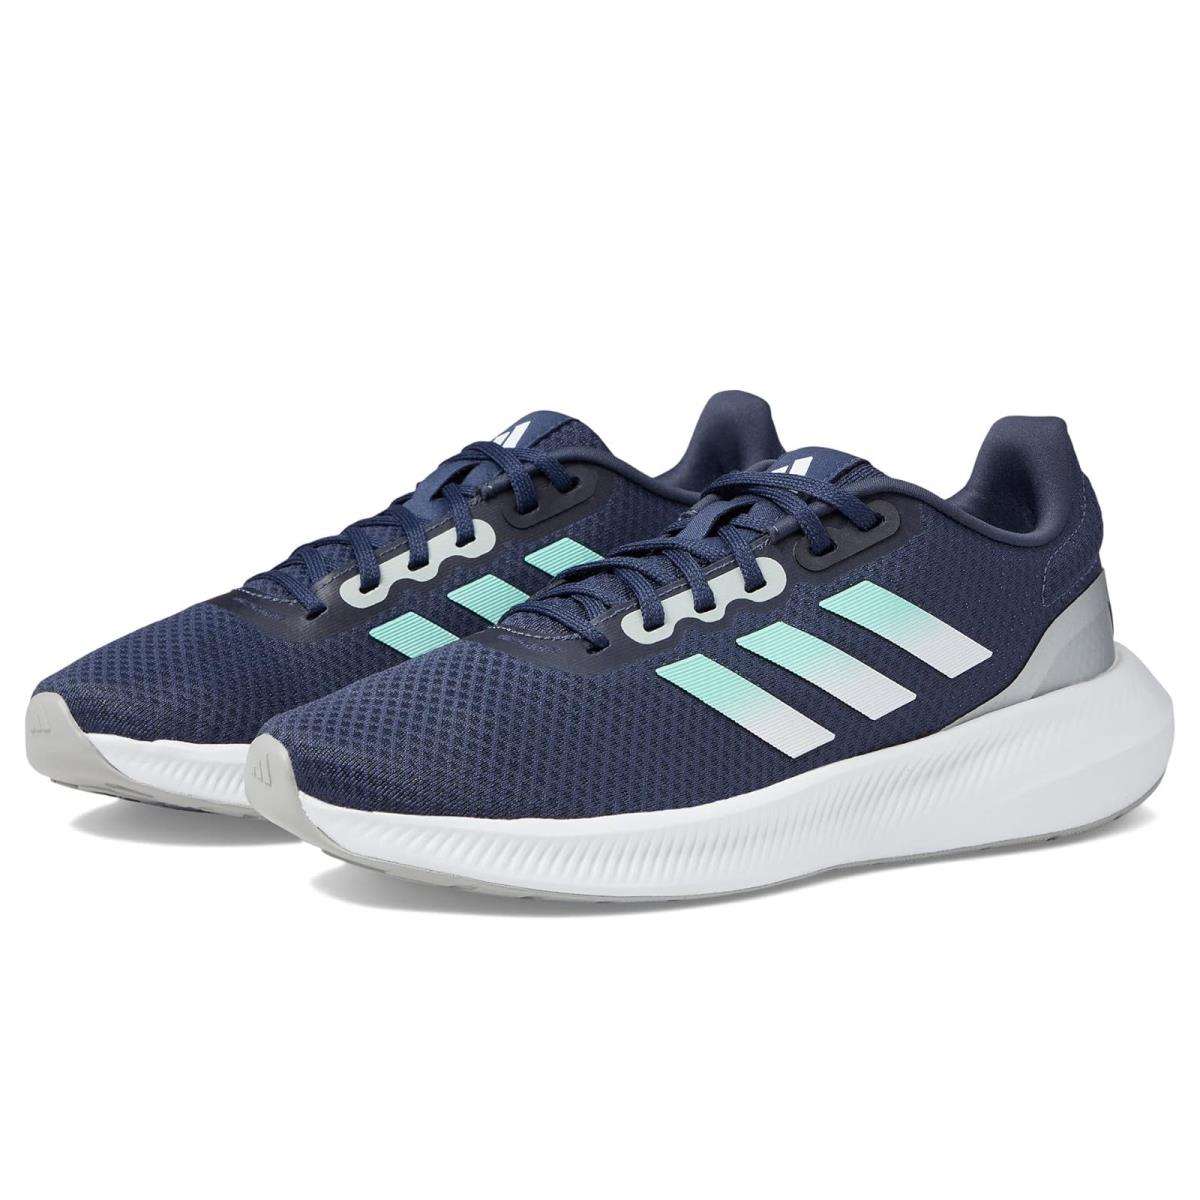 Woman`s Sneakers Athletic Shoes Adidas Running Runfalcon 3.0 Shadow Navy/Pulse Mint/Silver Metallic